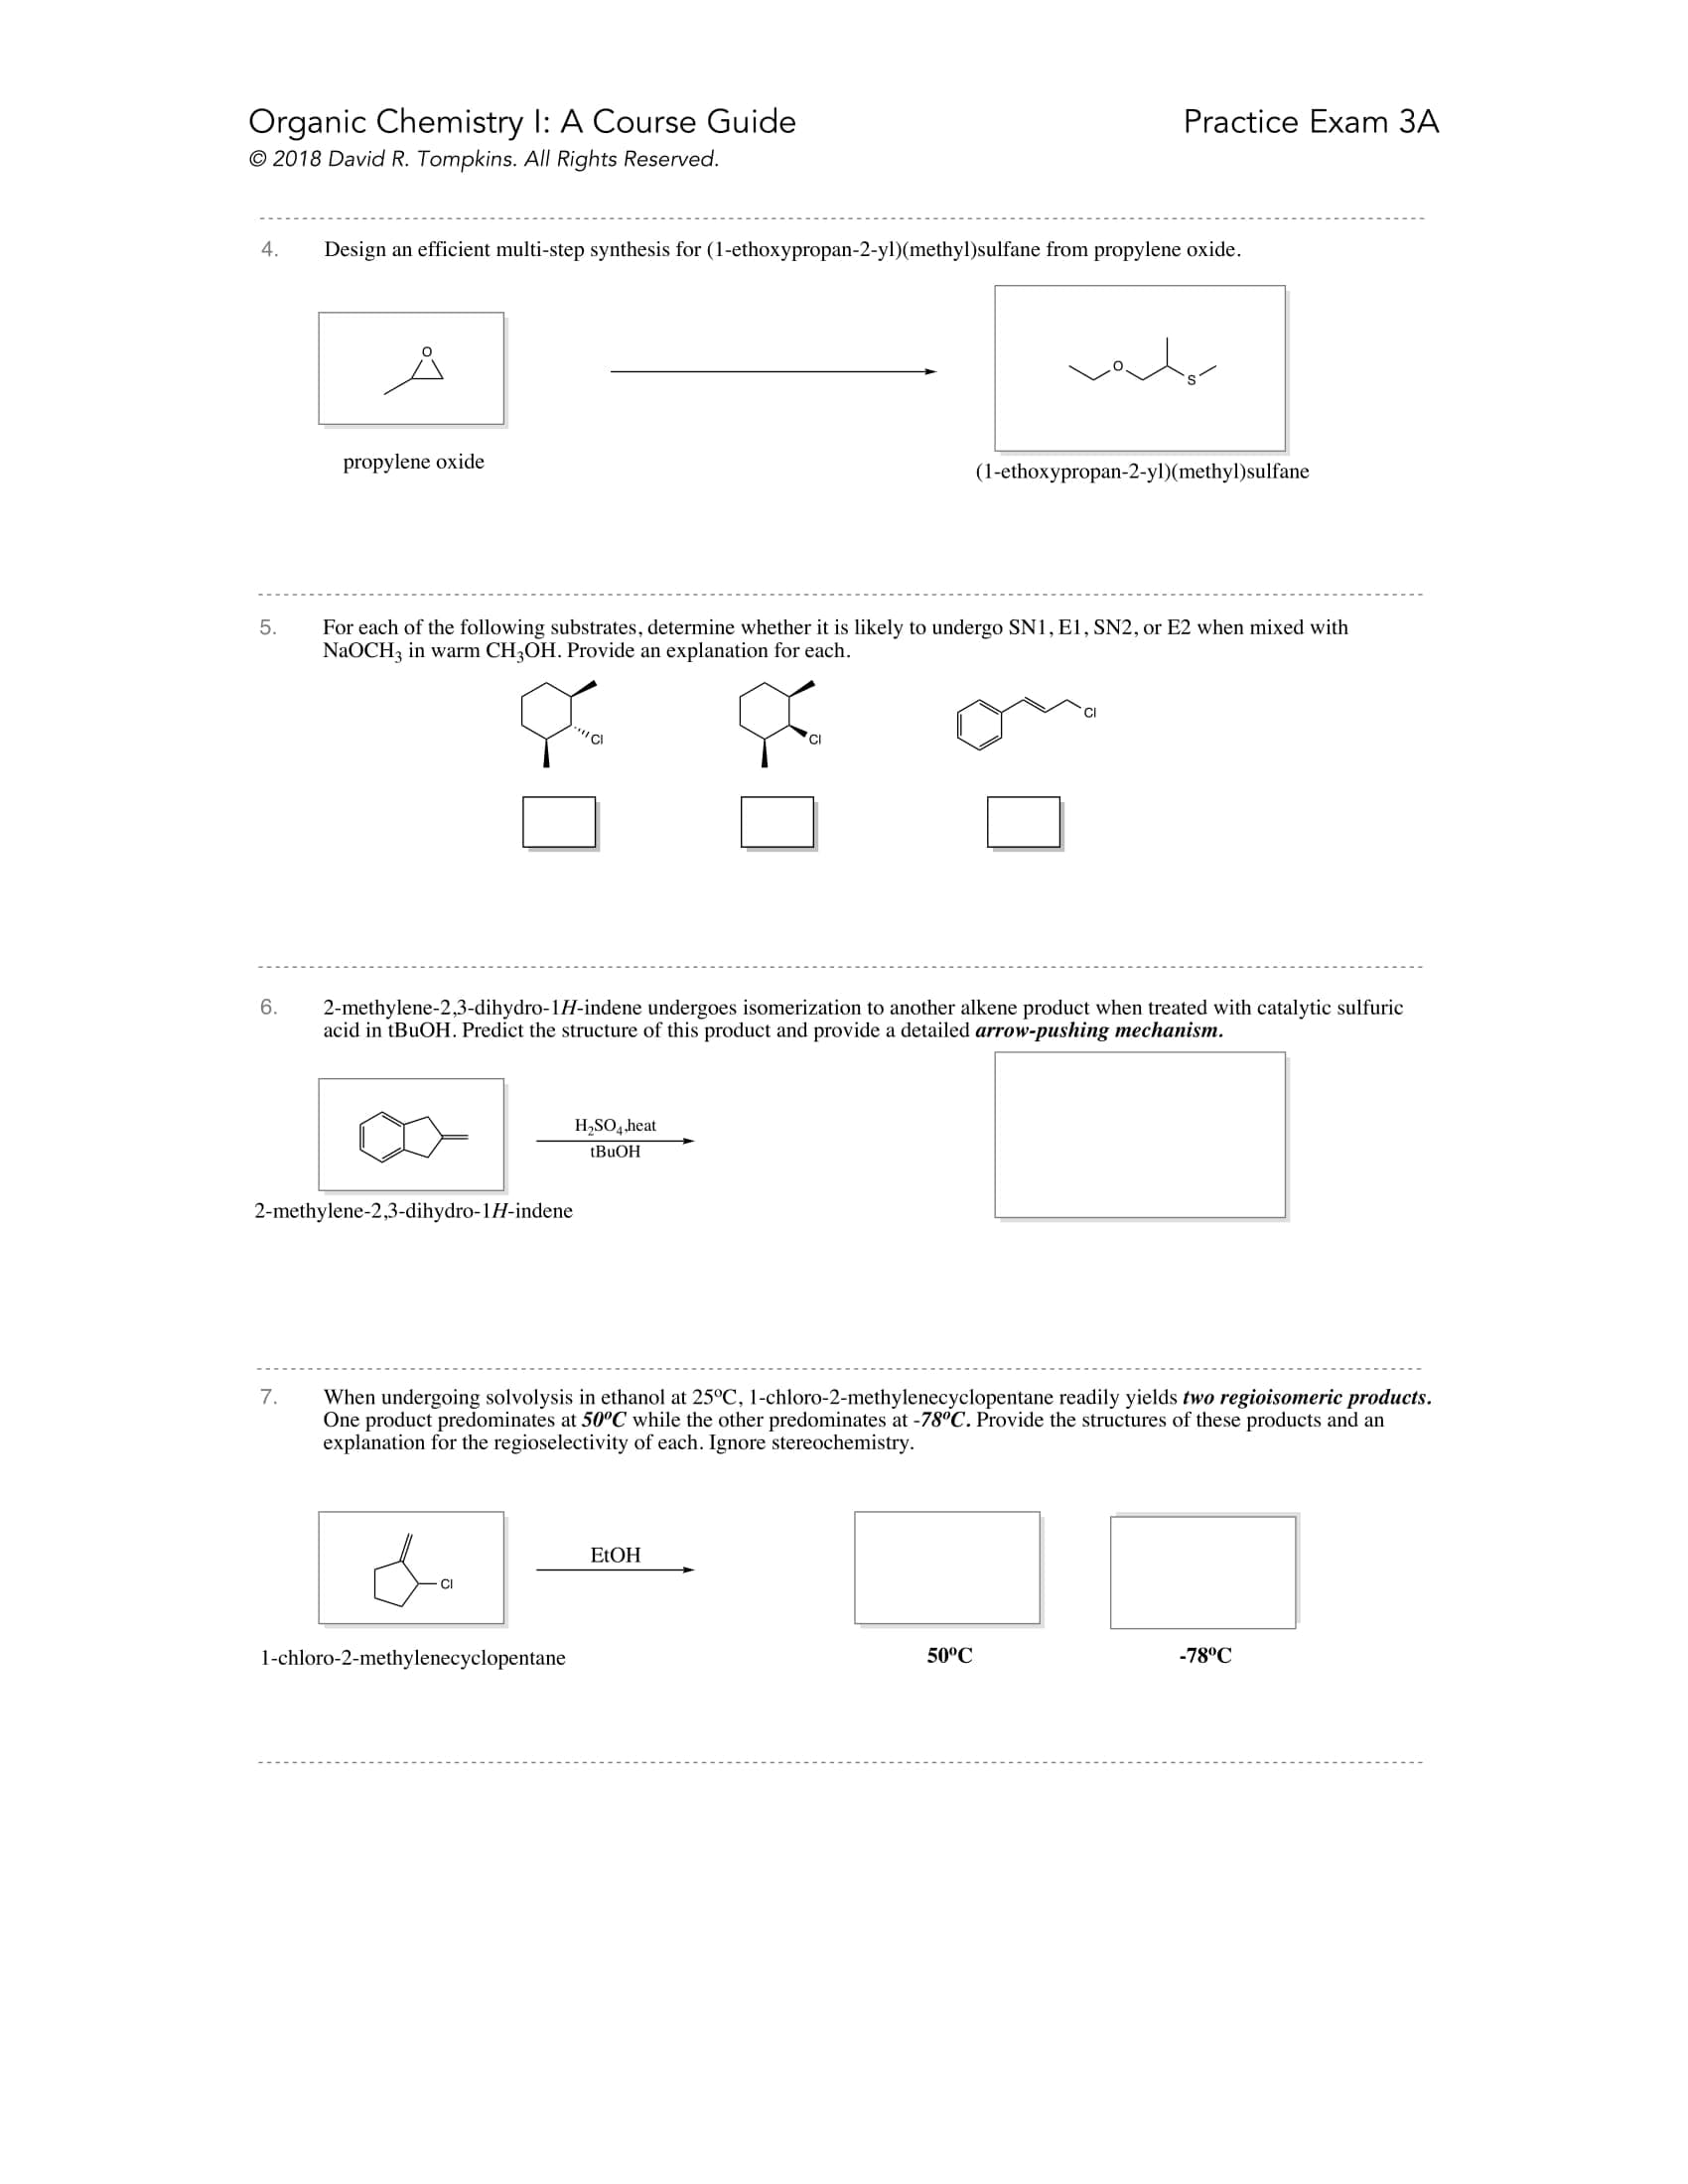 Introduction to Organic Chemistry I Course Guide Example Page 2